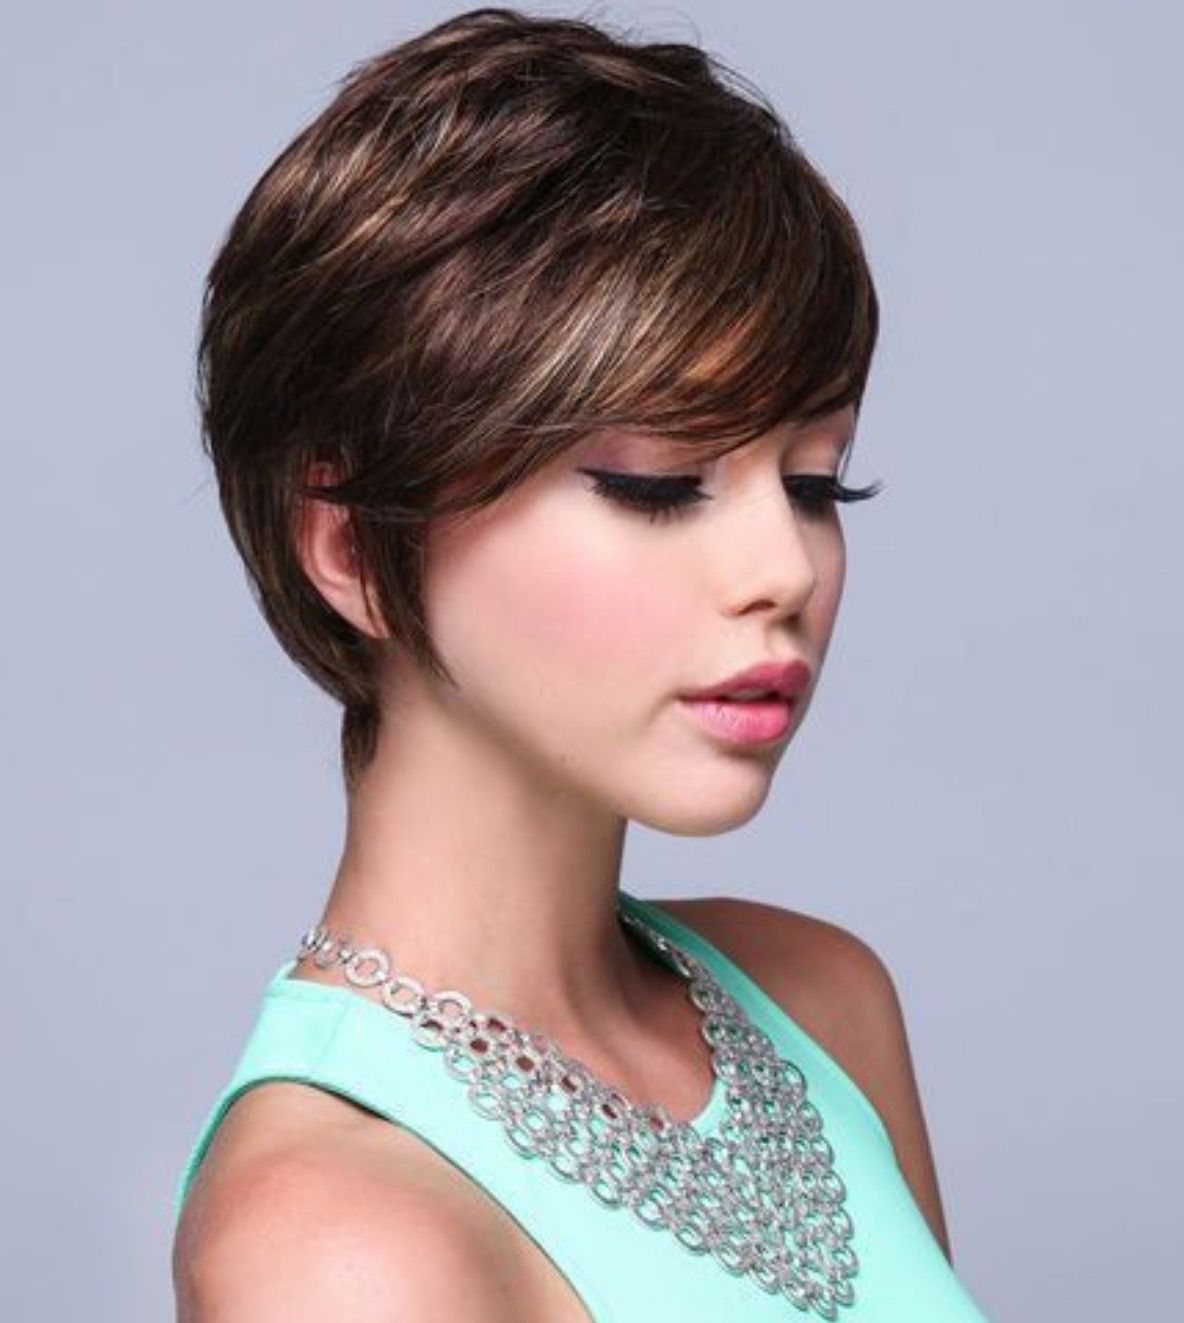 Very Cute Long Pixie Cut | Things That Catch My Eye | Pinterest With Regard To 2018 Medium Short Pixie Hairstyles (View 12 of 15)